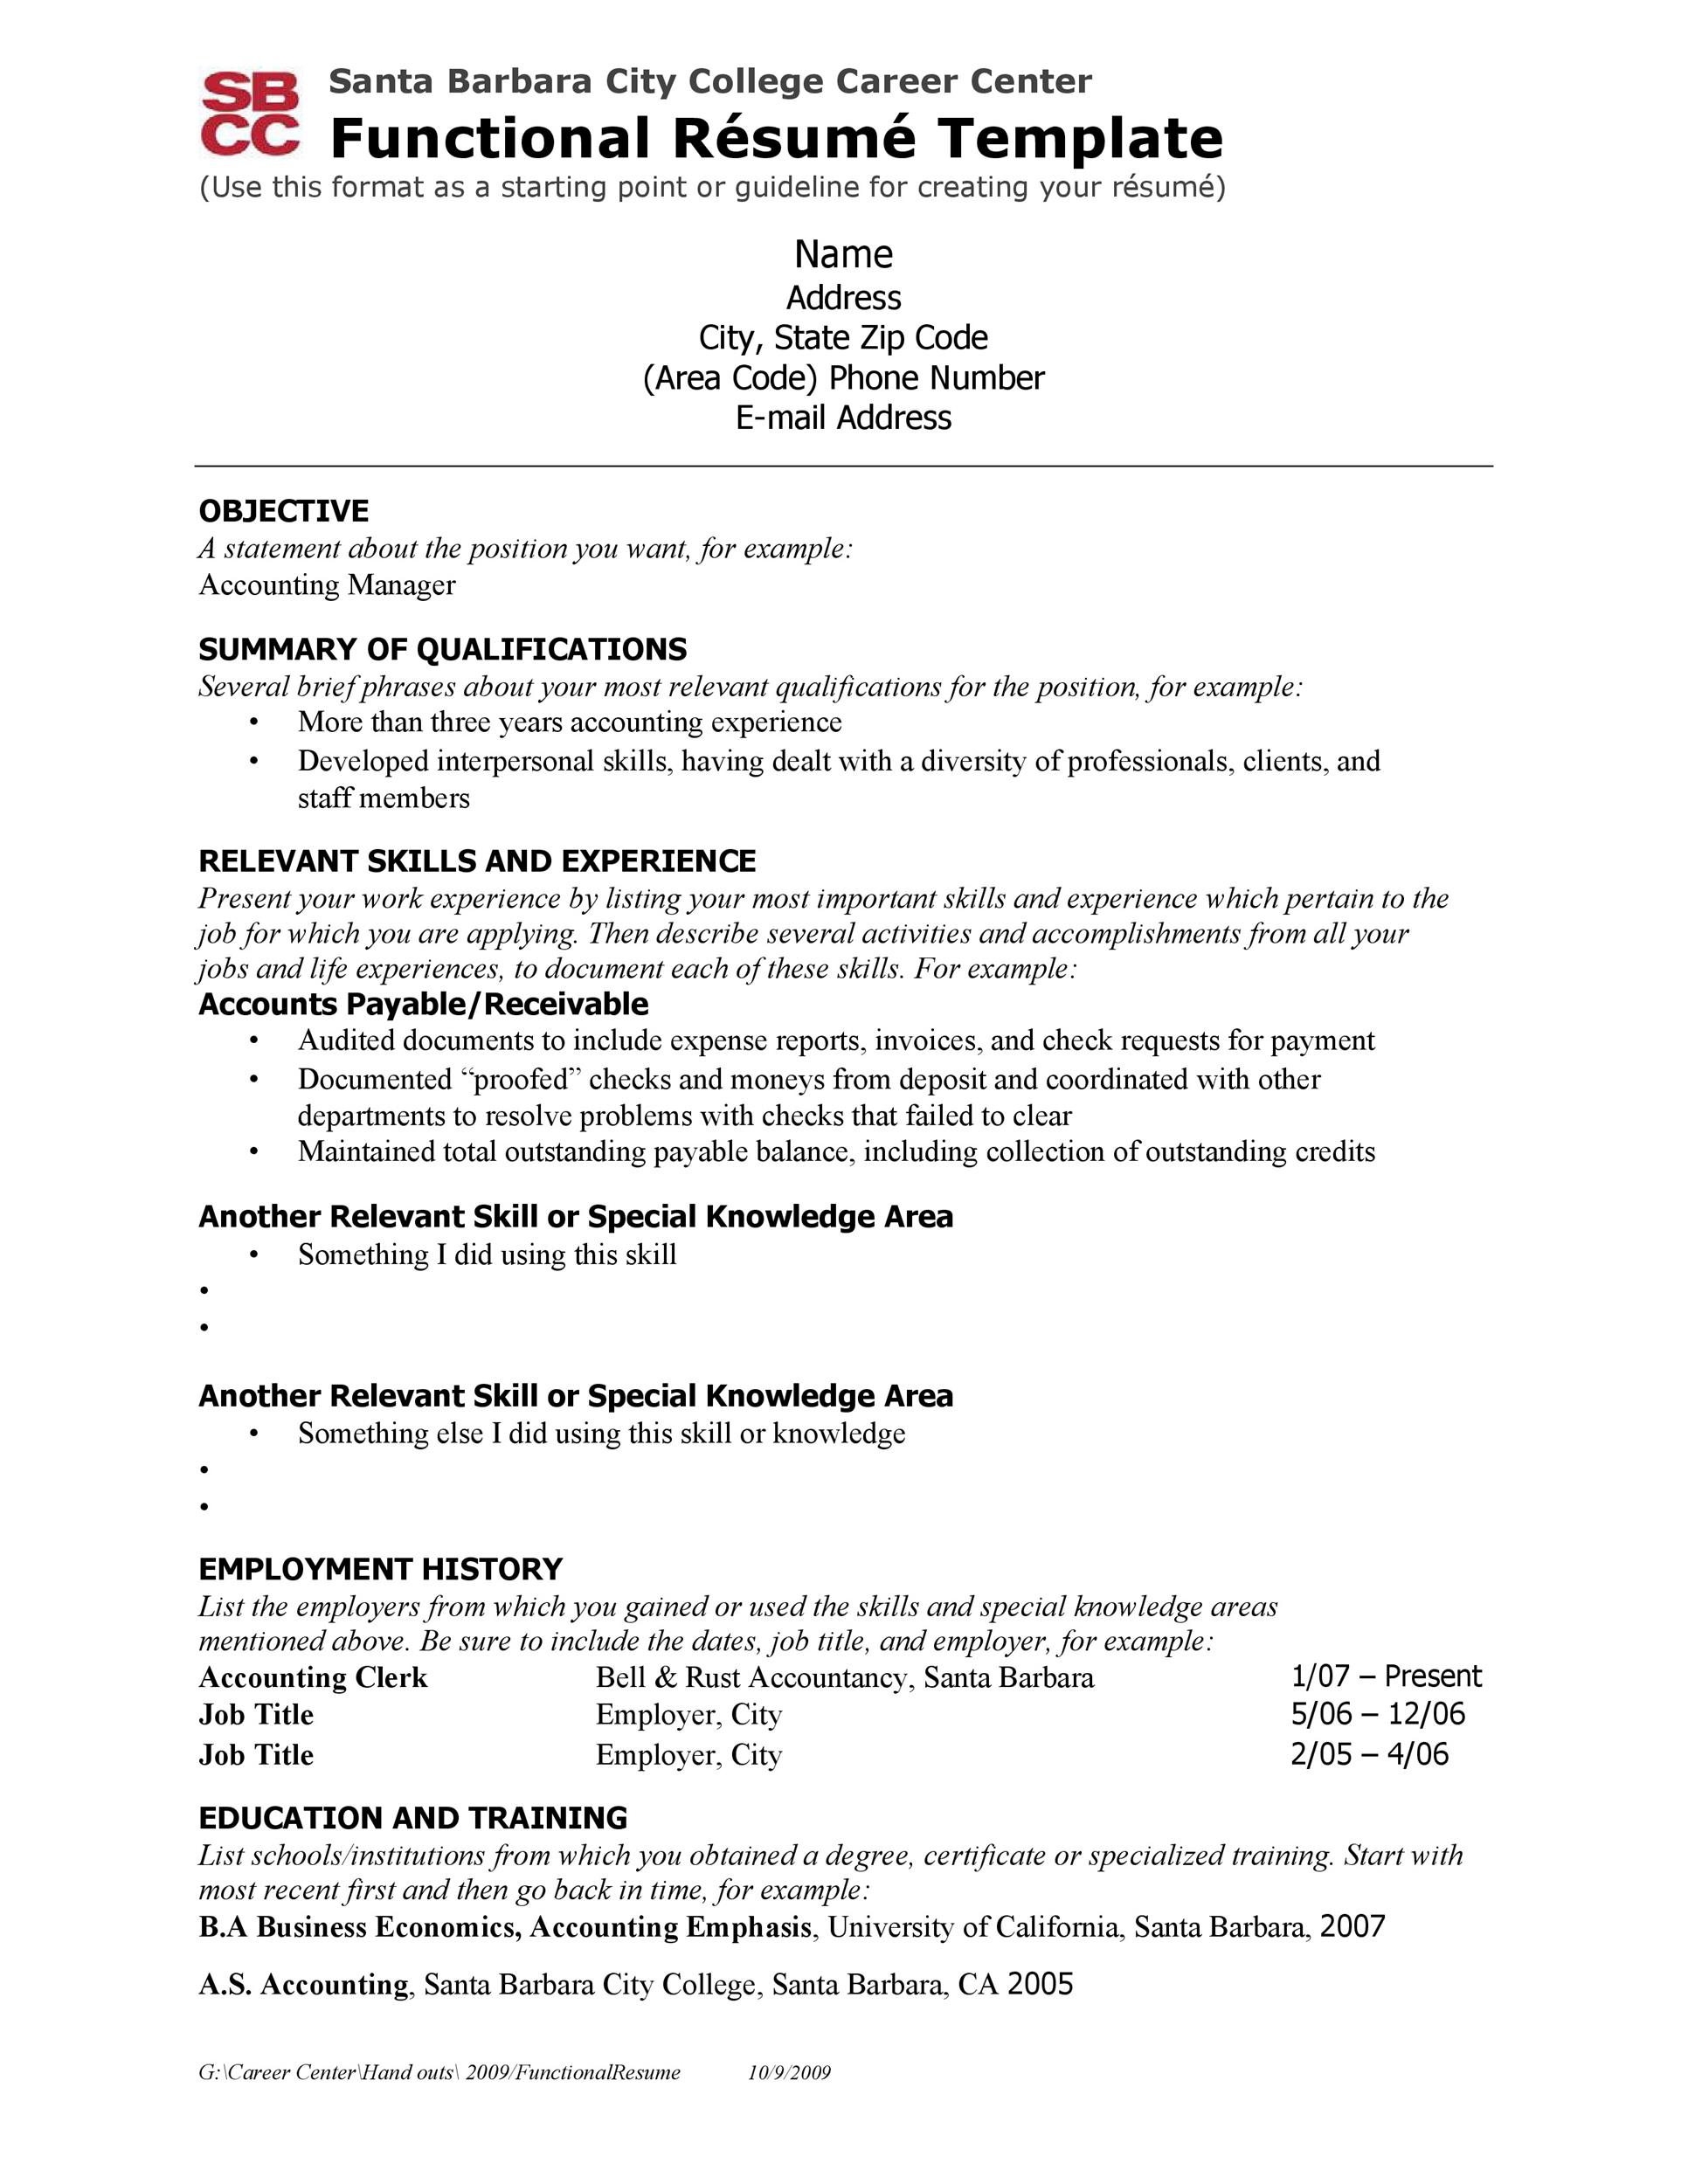 Free college resume template 12